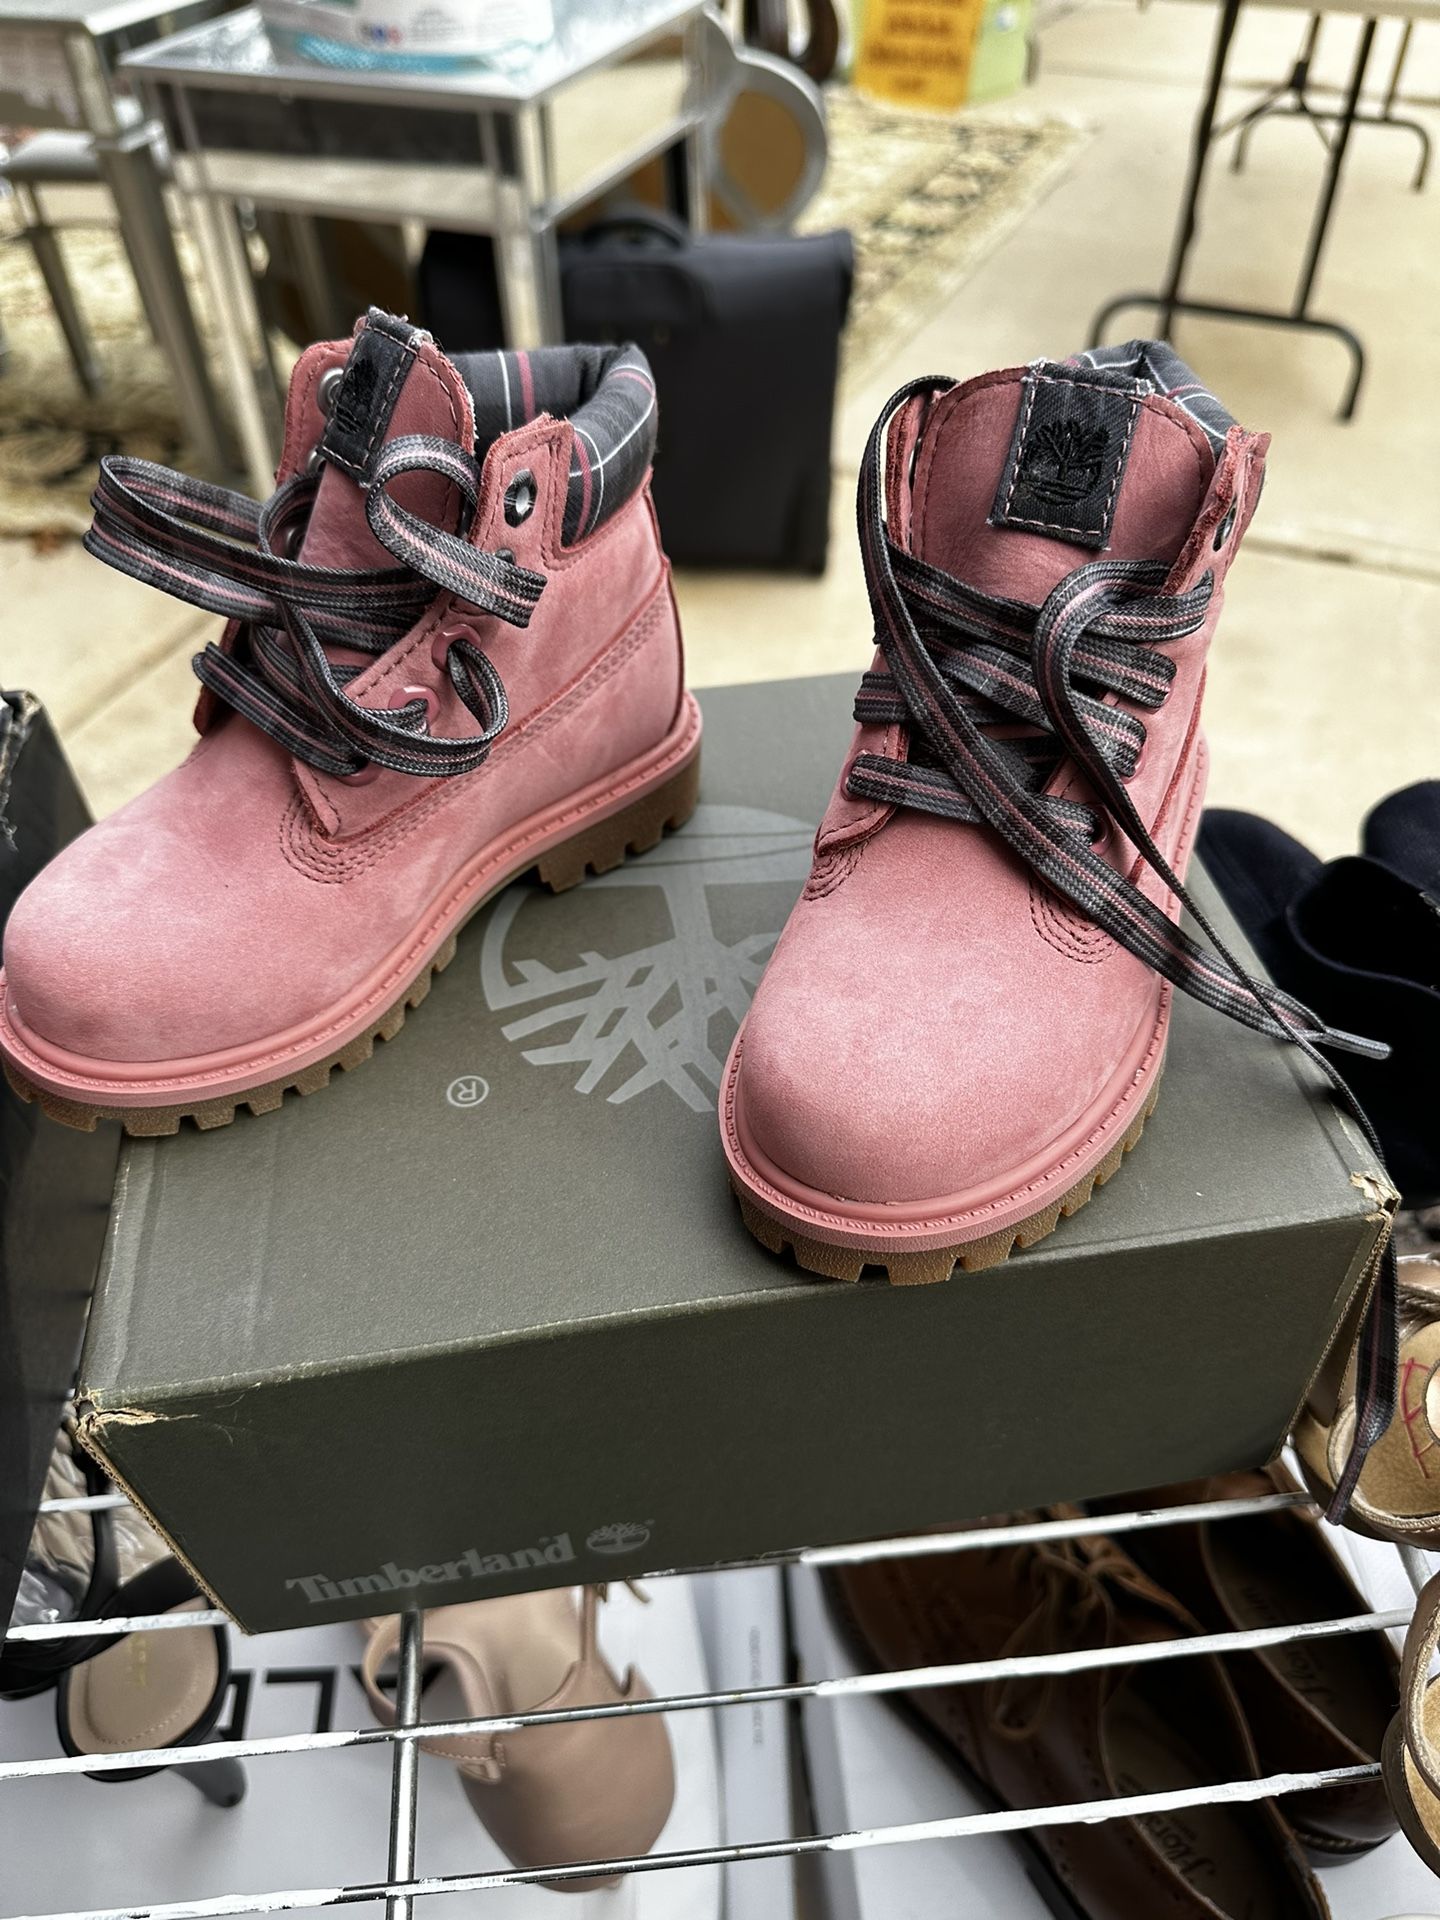 New Timberland boots Size 8